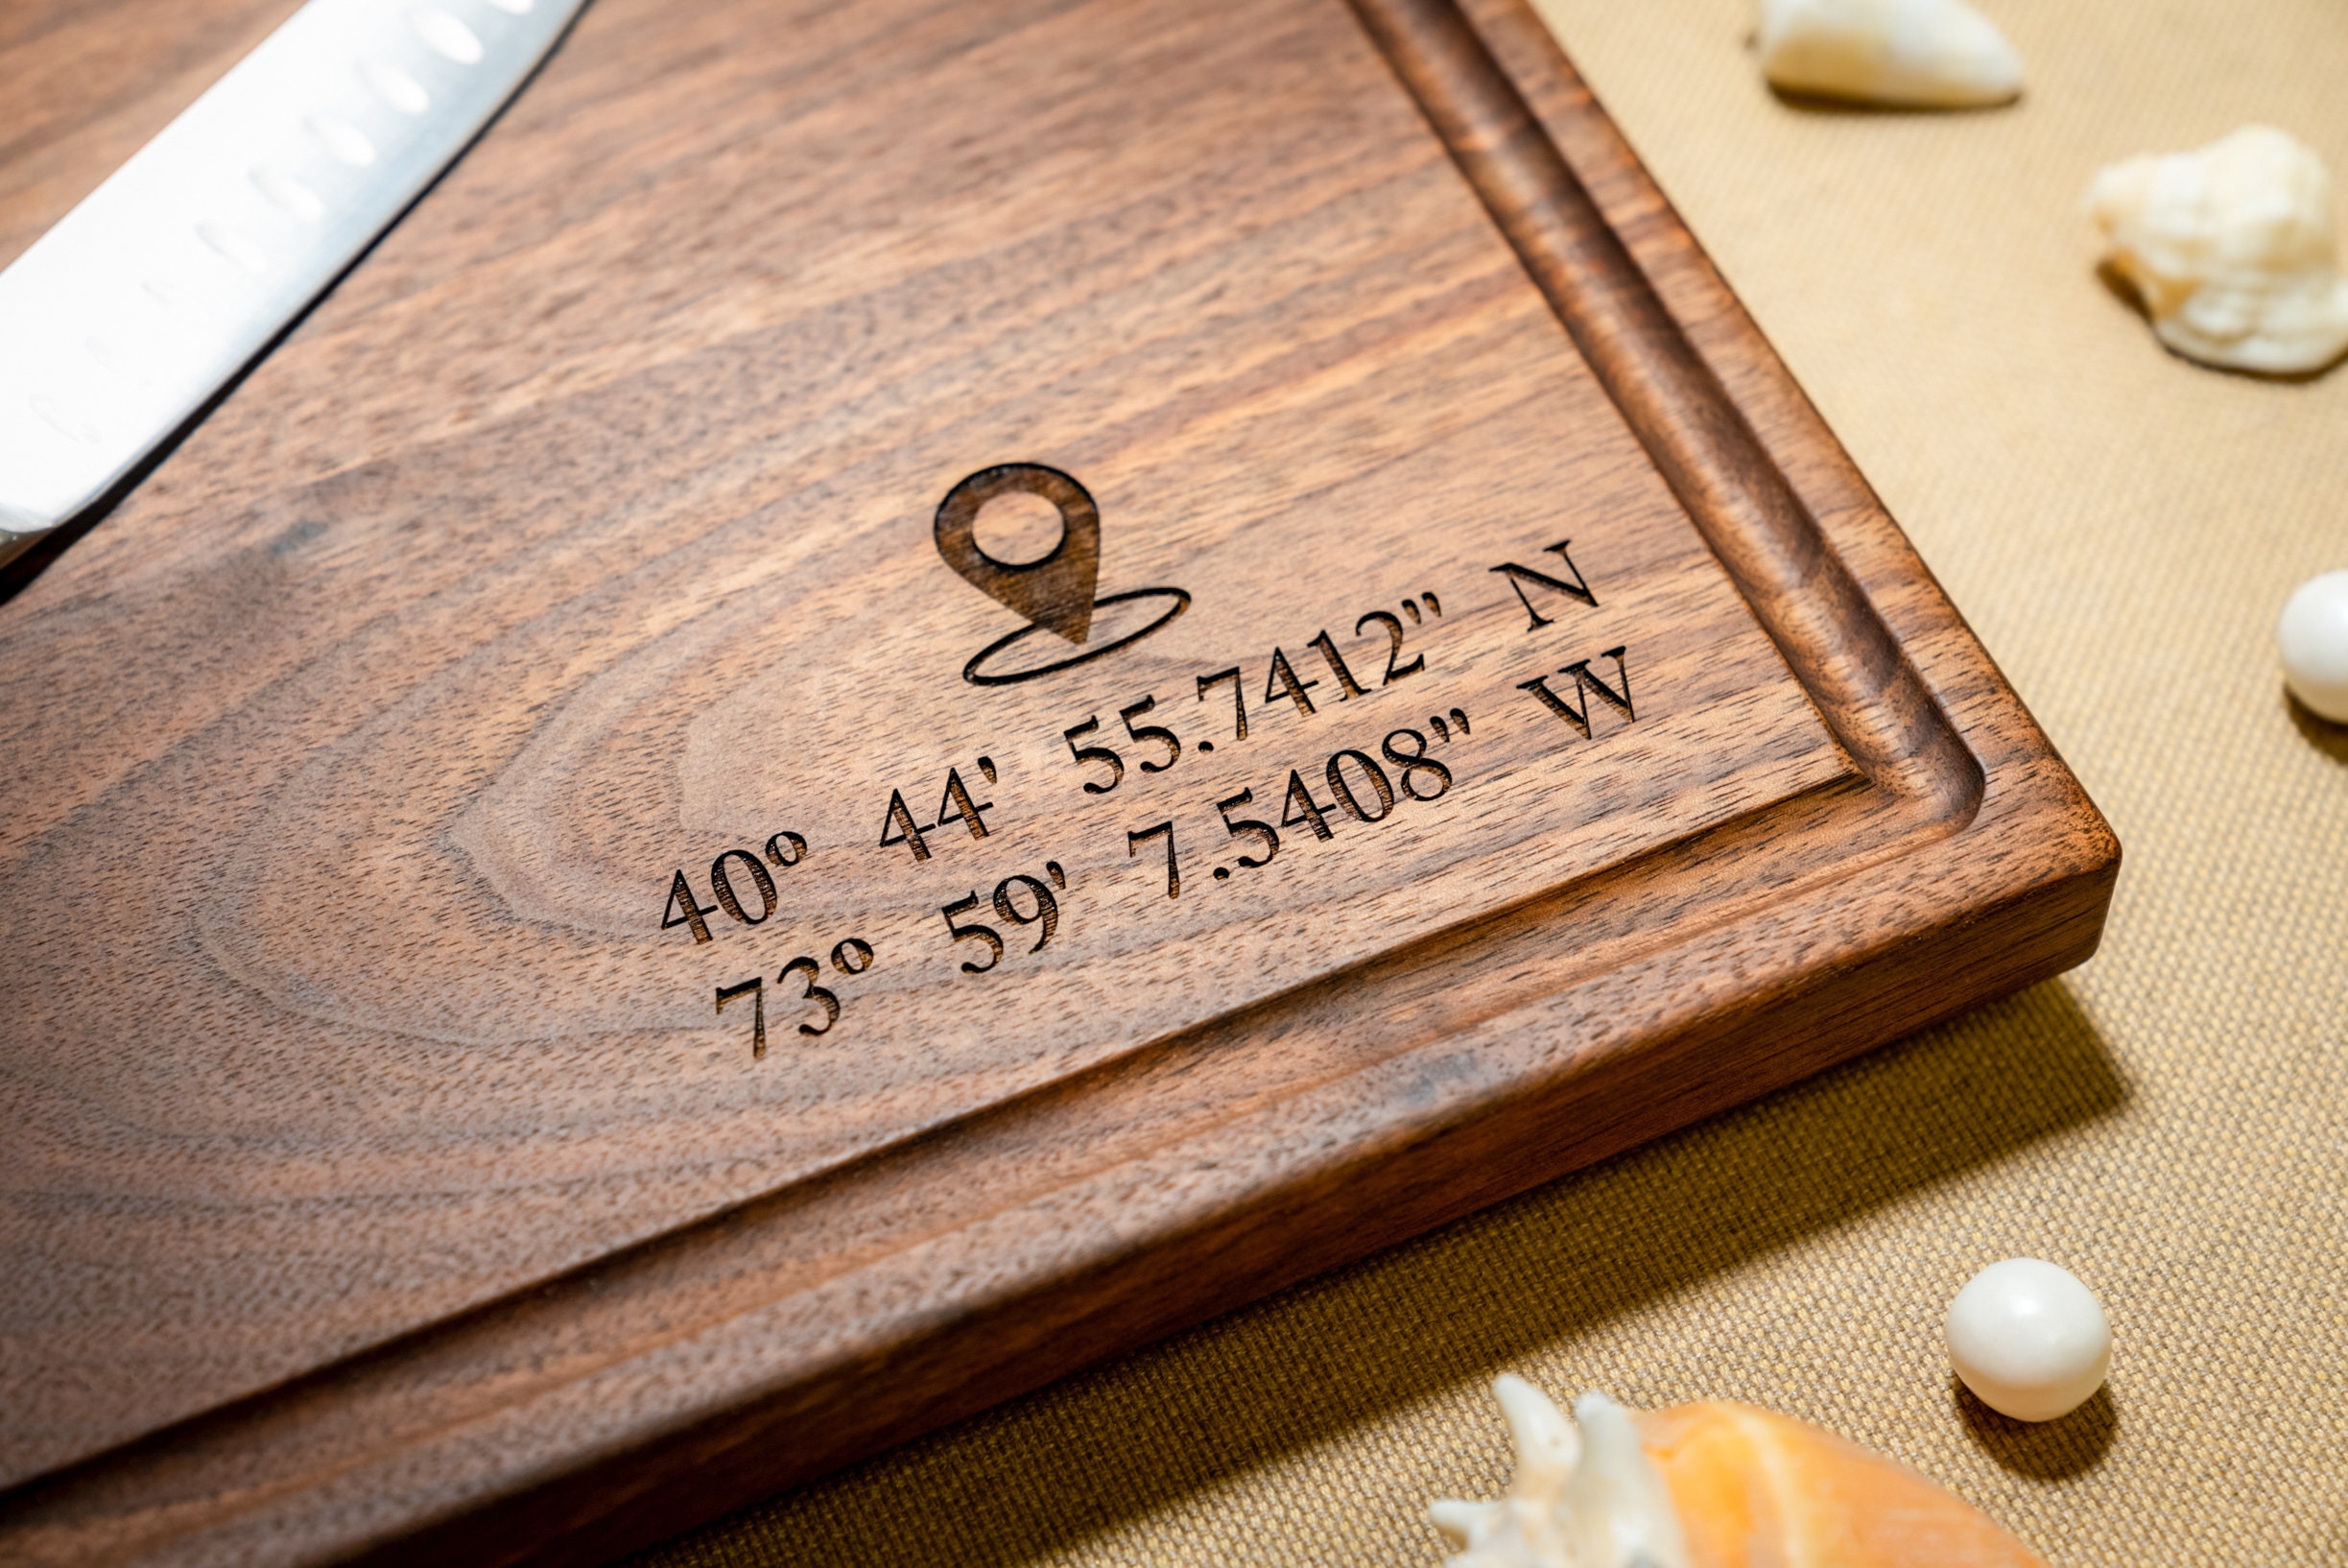 Personalized, Engraved Cutting Board with Kitchen Design for Housewarming  or Closing Gift #119 - Walnut Artisan Gallery